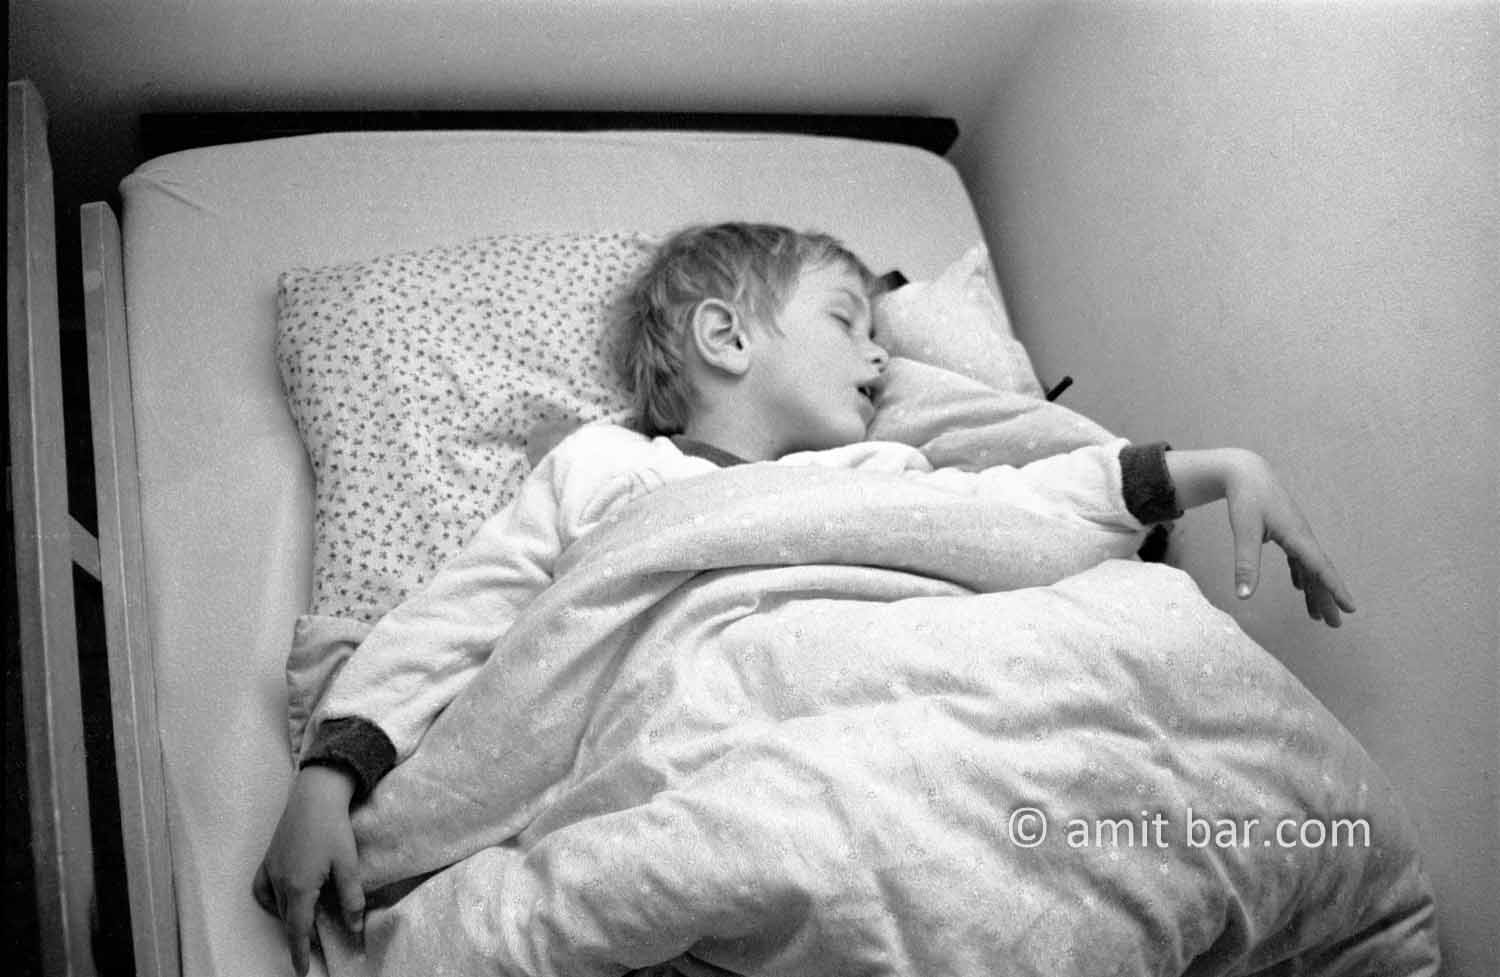 Dreaming I: A child is dreaming in his bed